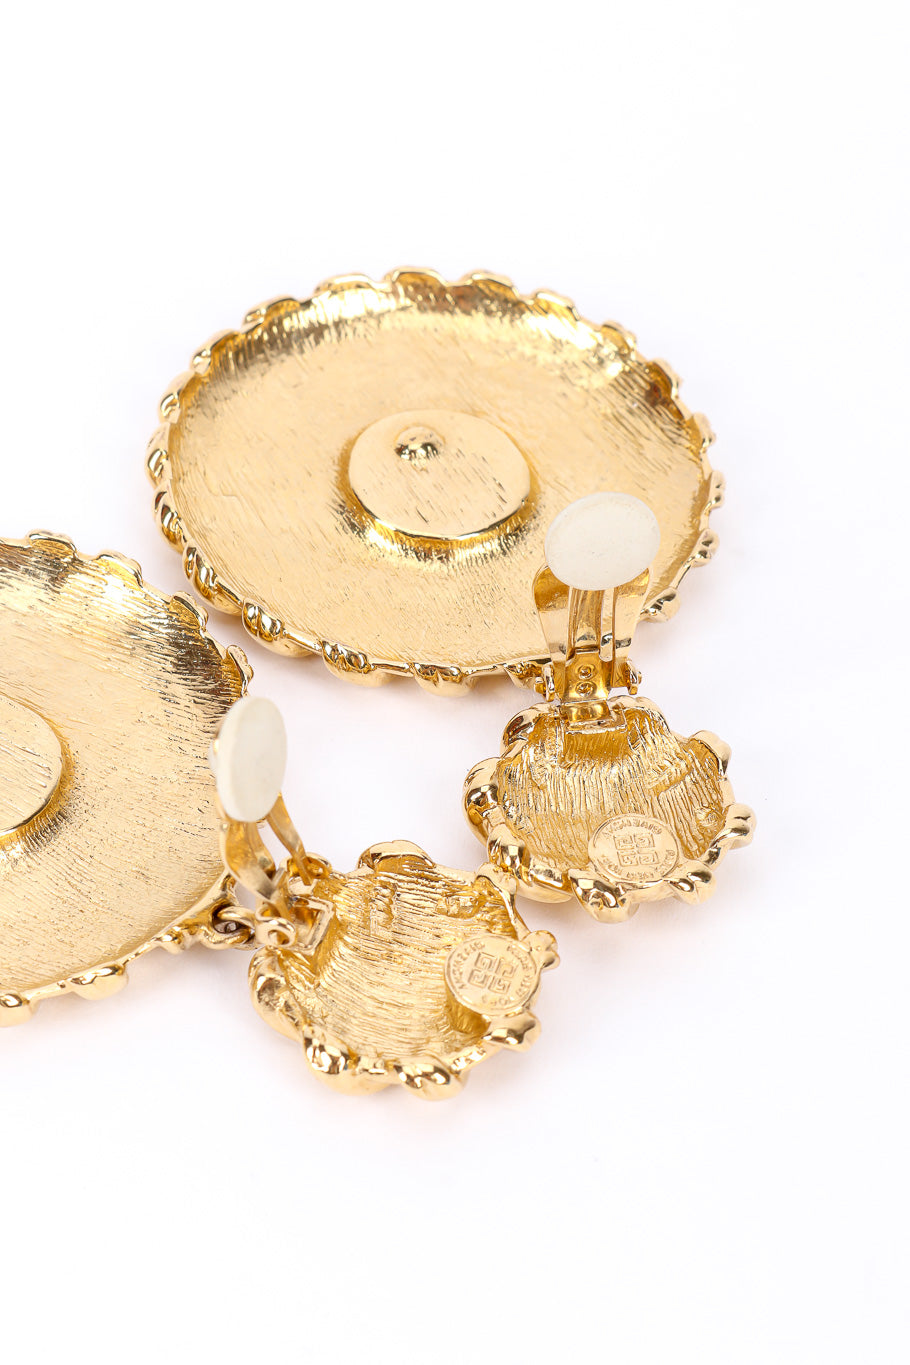 Medallion drop earrings by Givenchy on white background backs open @recessla